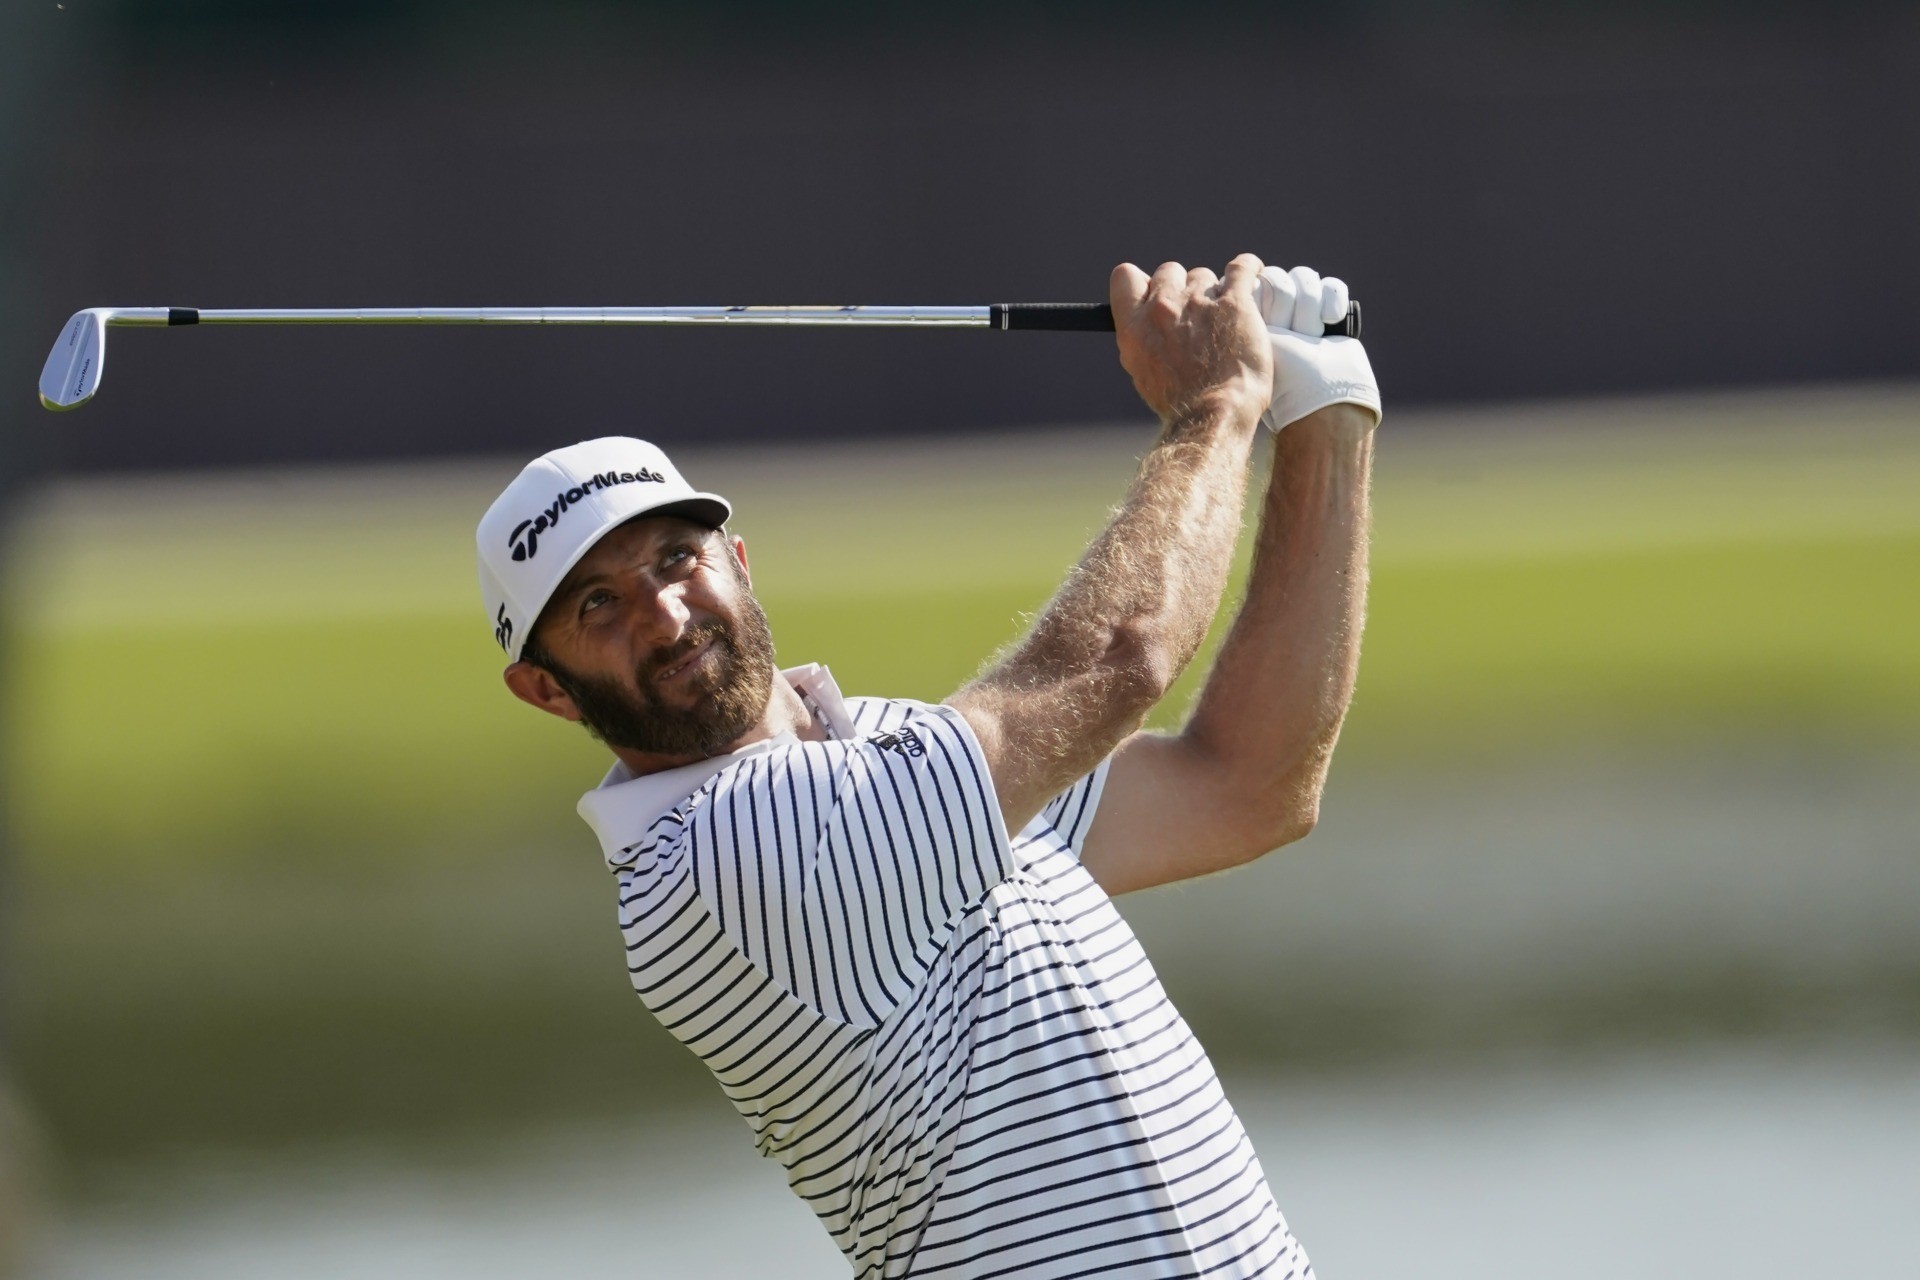 Dustin Johnson was in the fairway and putting well From the fairway, Johnso...